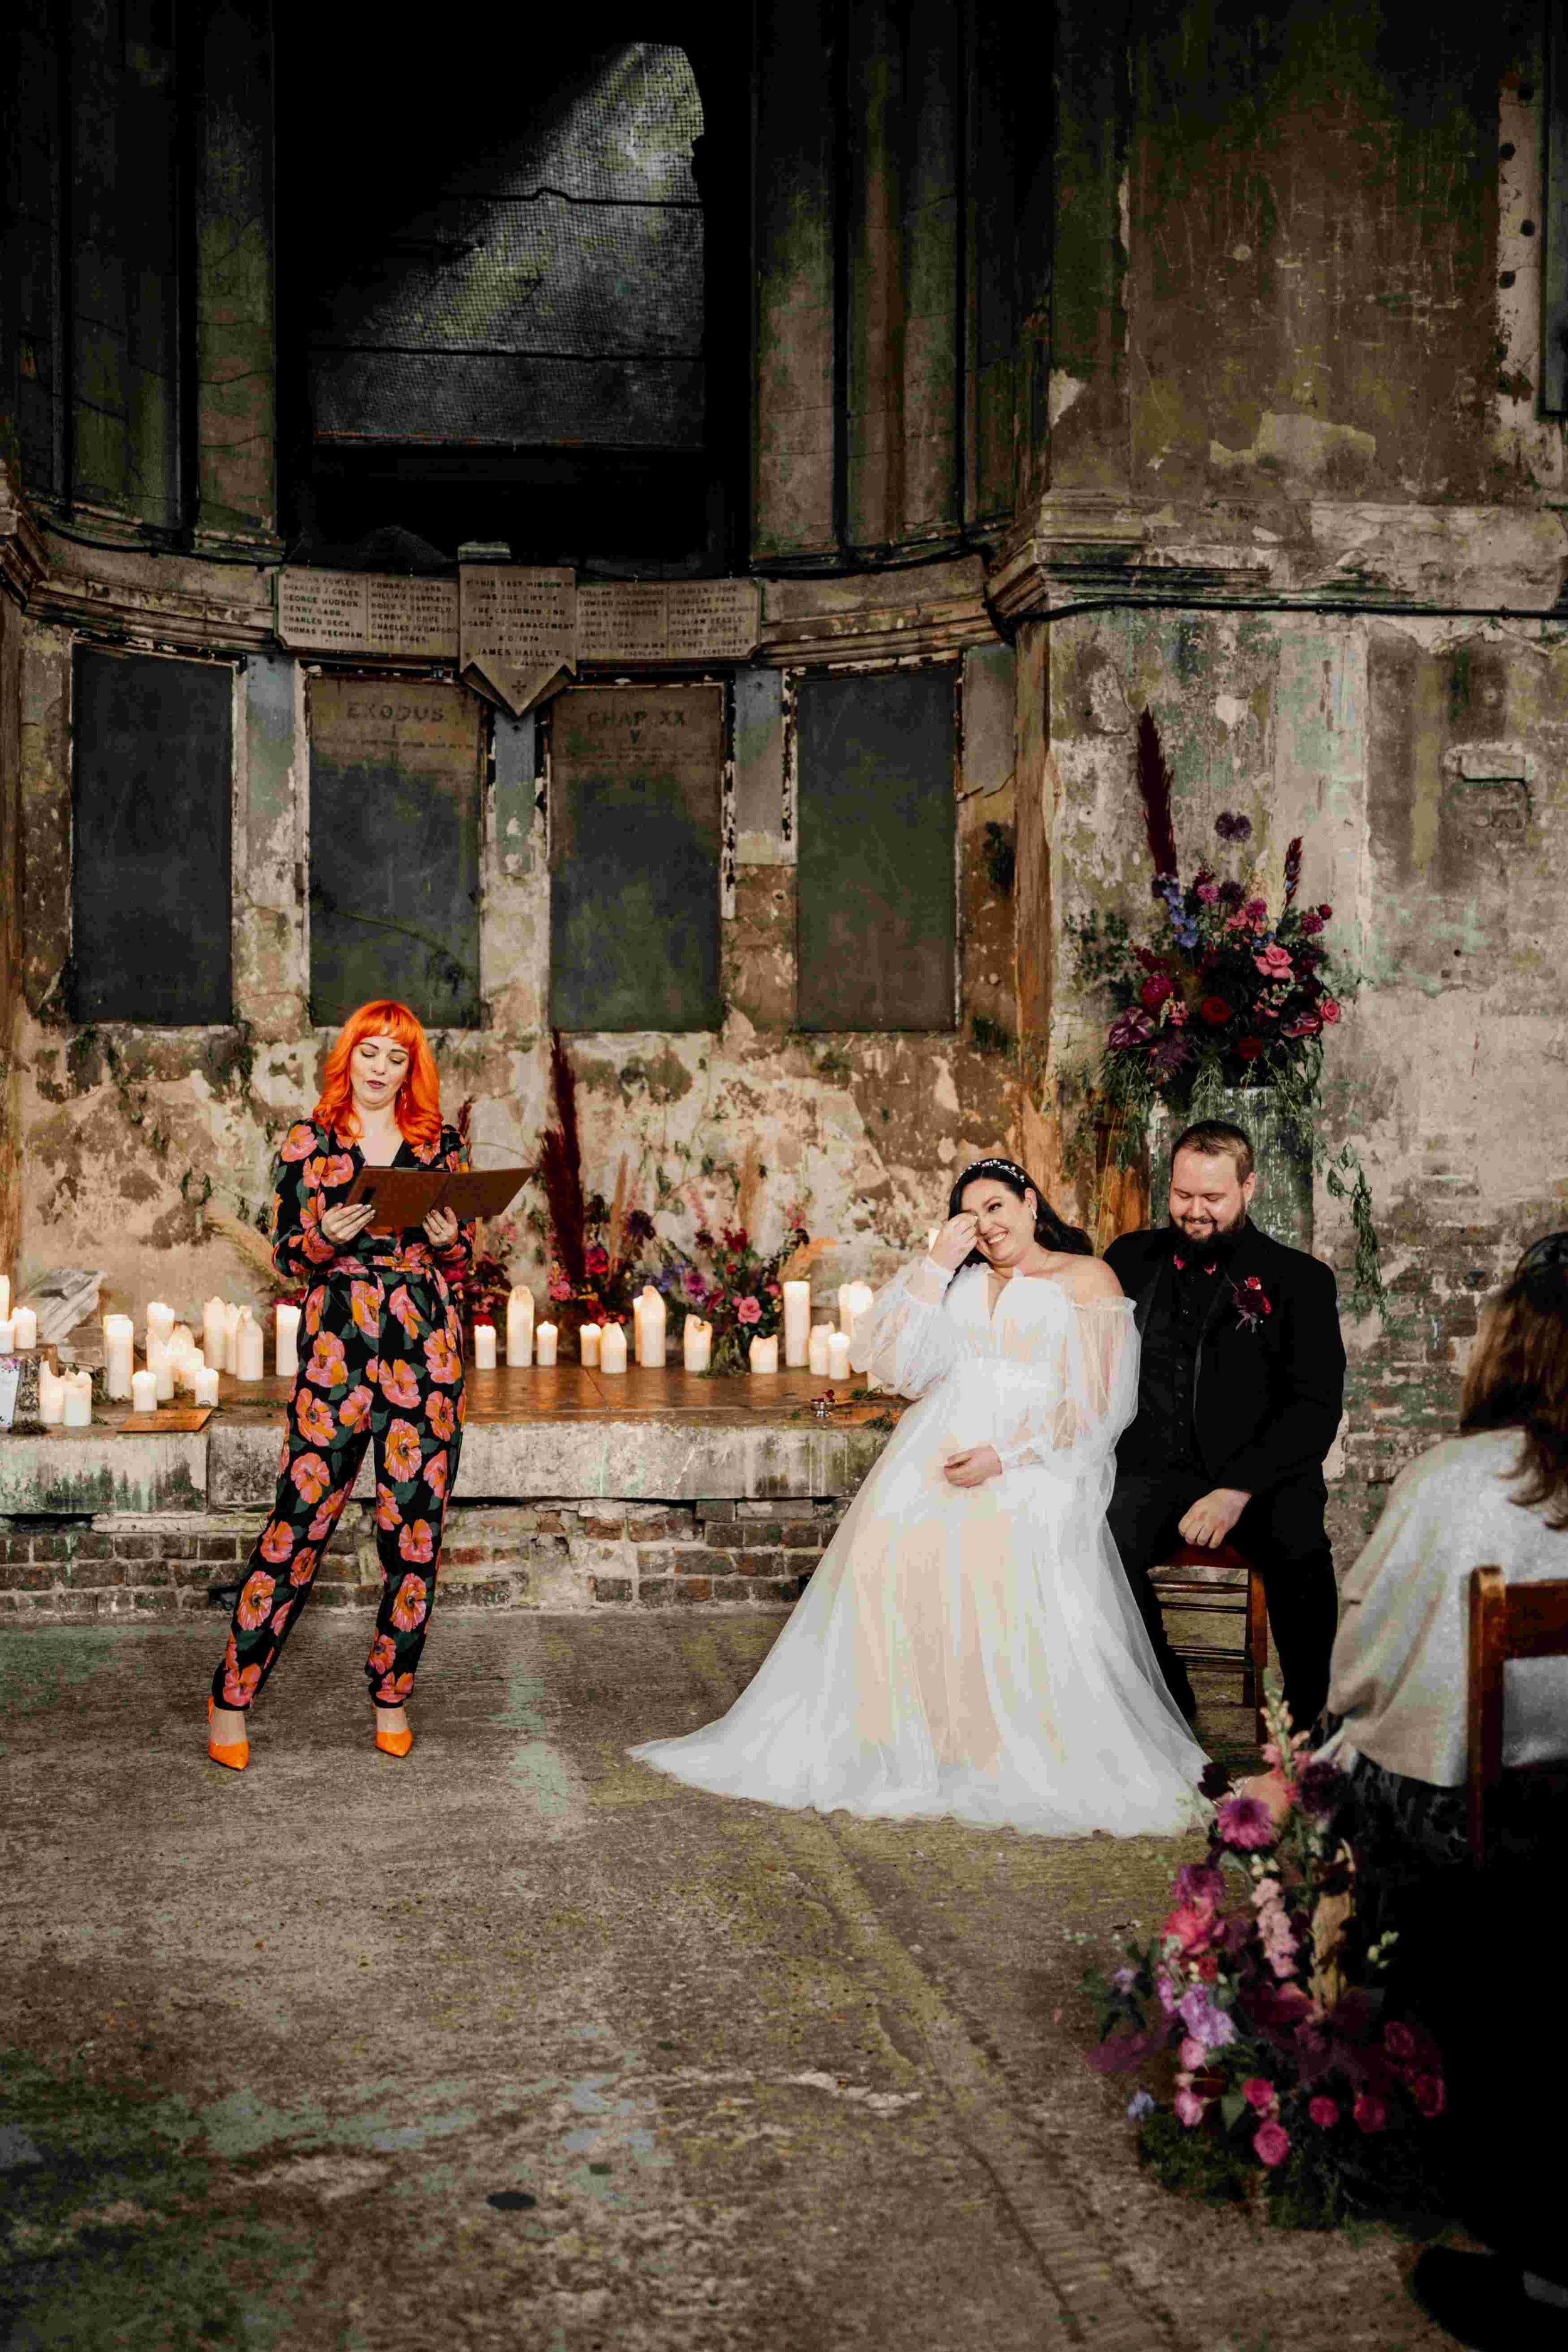  Photo by: Tom Wyatt Photography  Within a bare stone room and with a low ledge filled with pillar candles and a wild floral installation which the modern wedding celebrant is stood in front of facing the bride and groom’s wedding guests with the bri